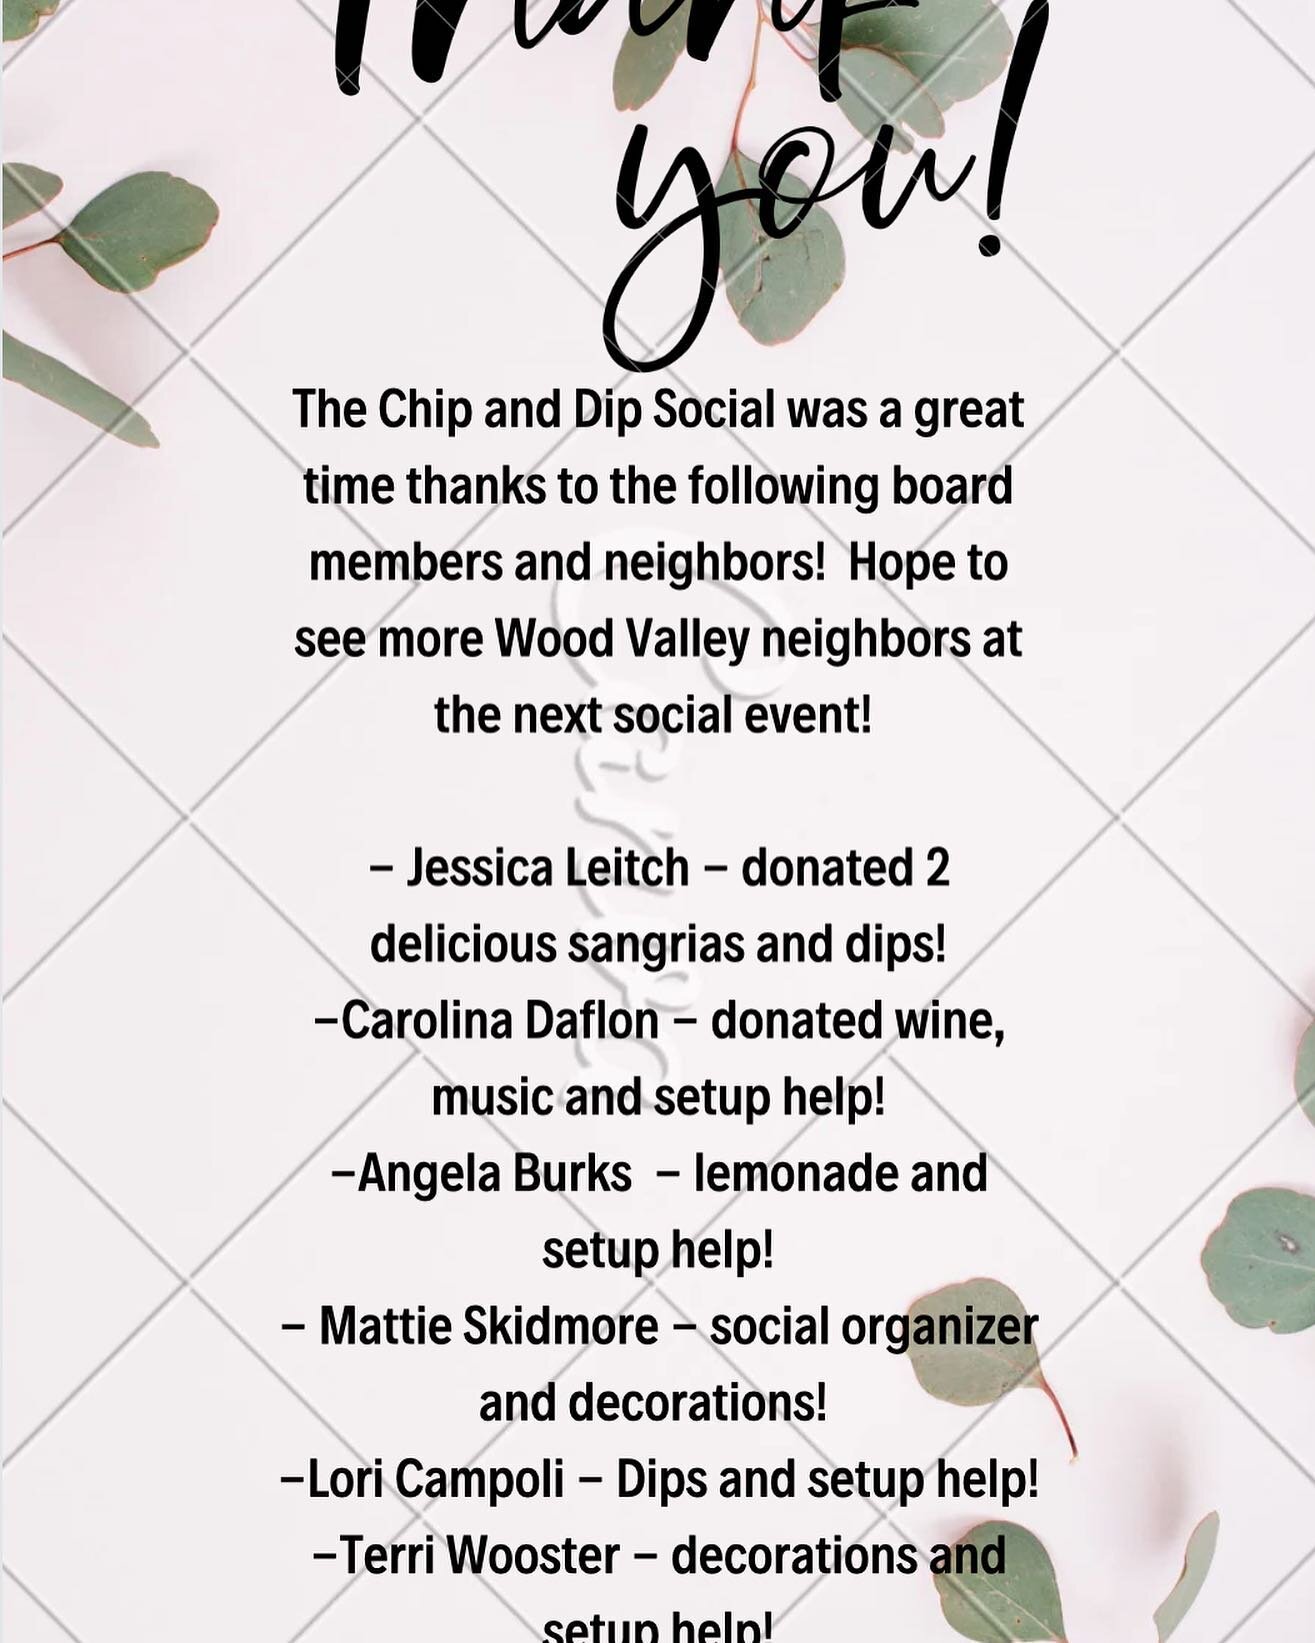 Thank you to our neighbors  and board members who made the Chip and Dip social such a great time!